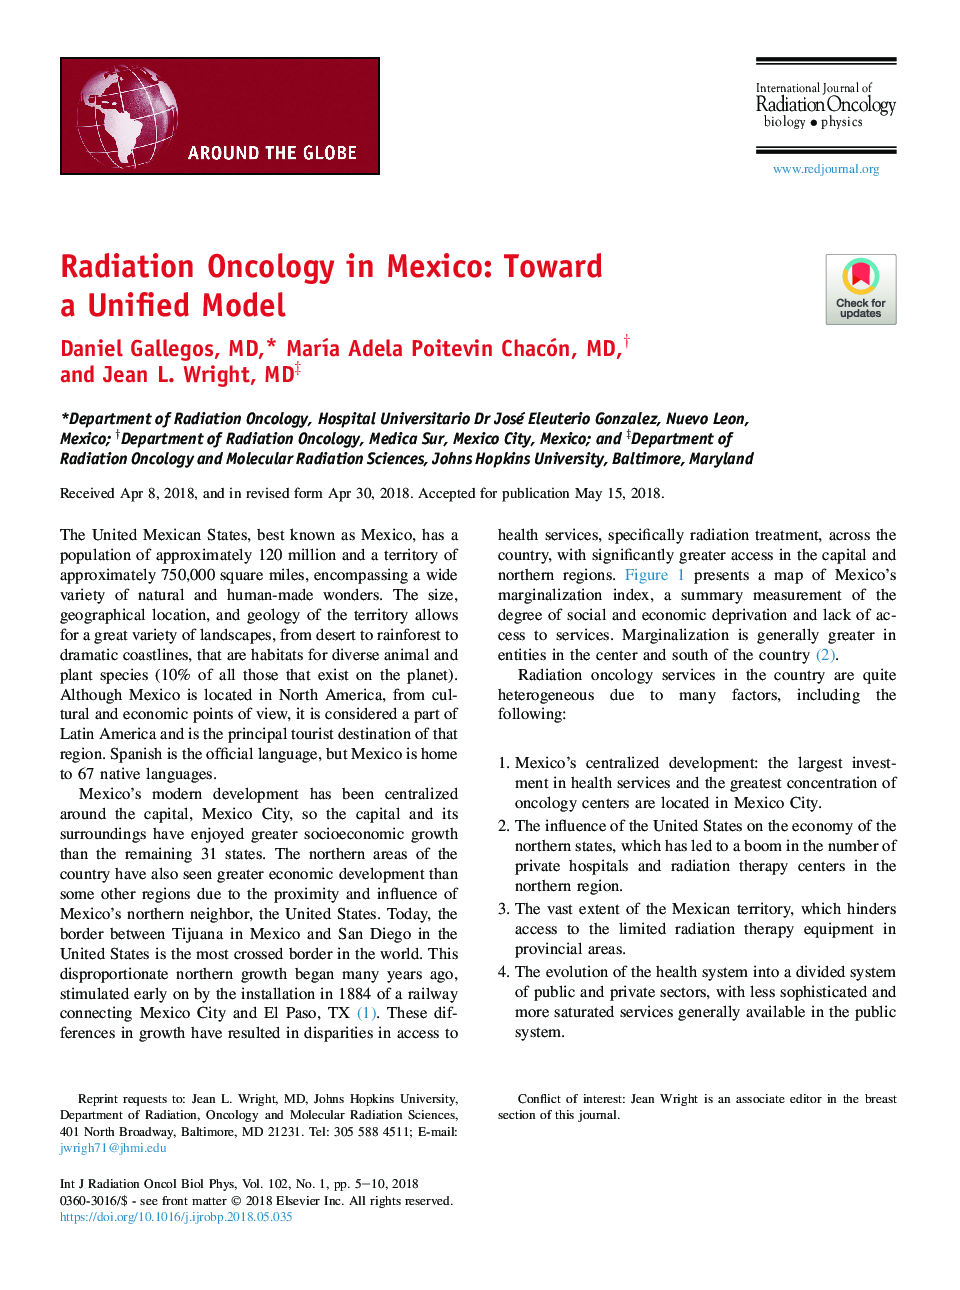 Radiation Oncology in Mexico: Toward a Unified Model